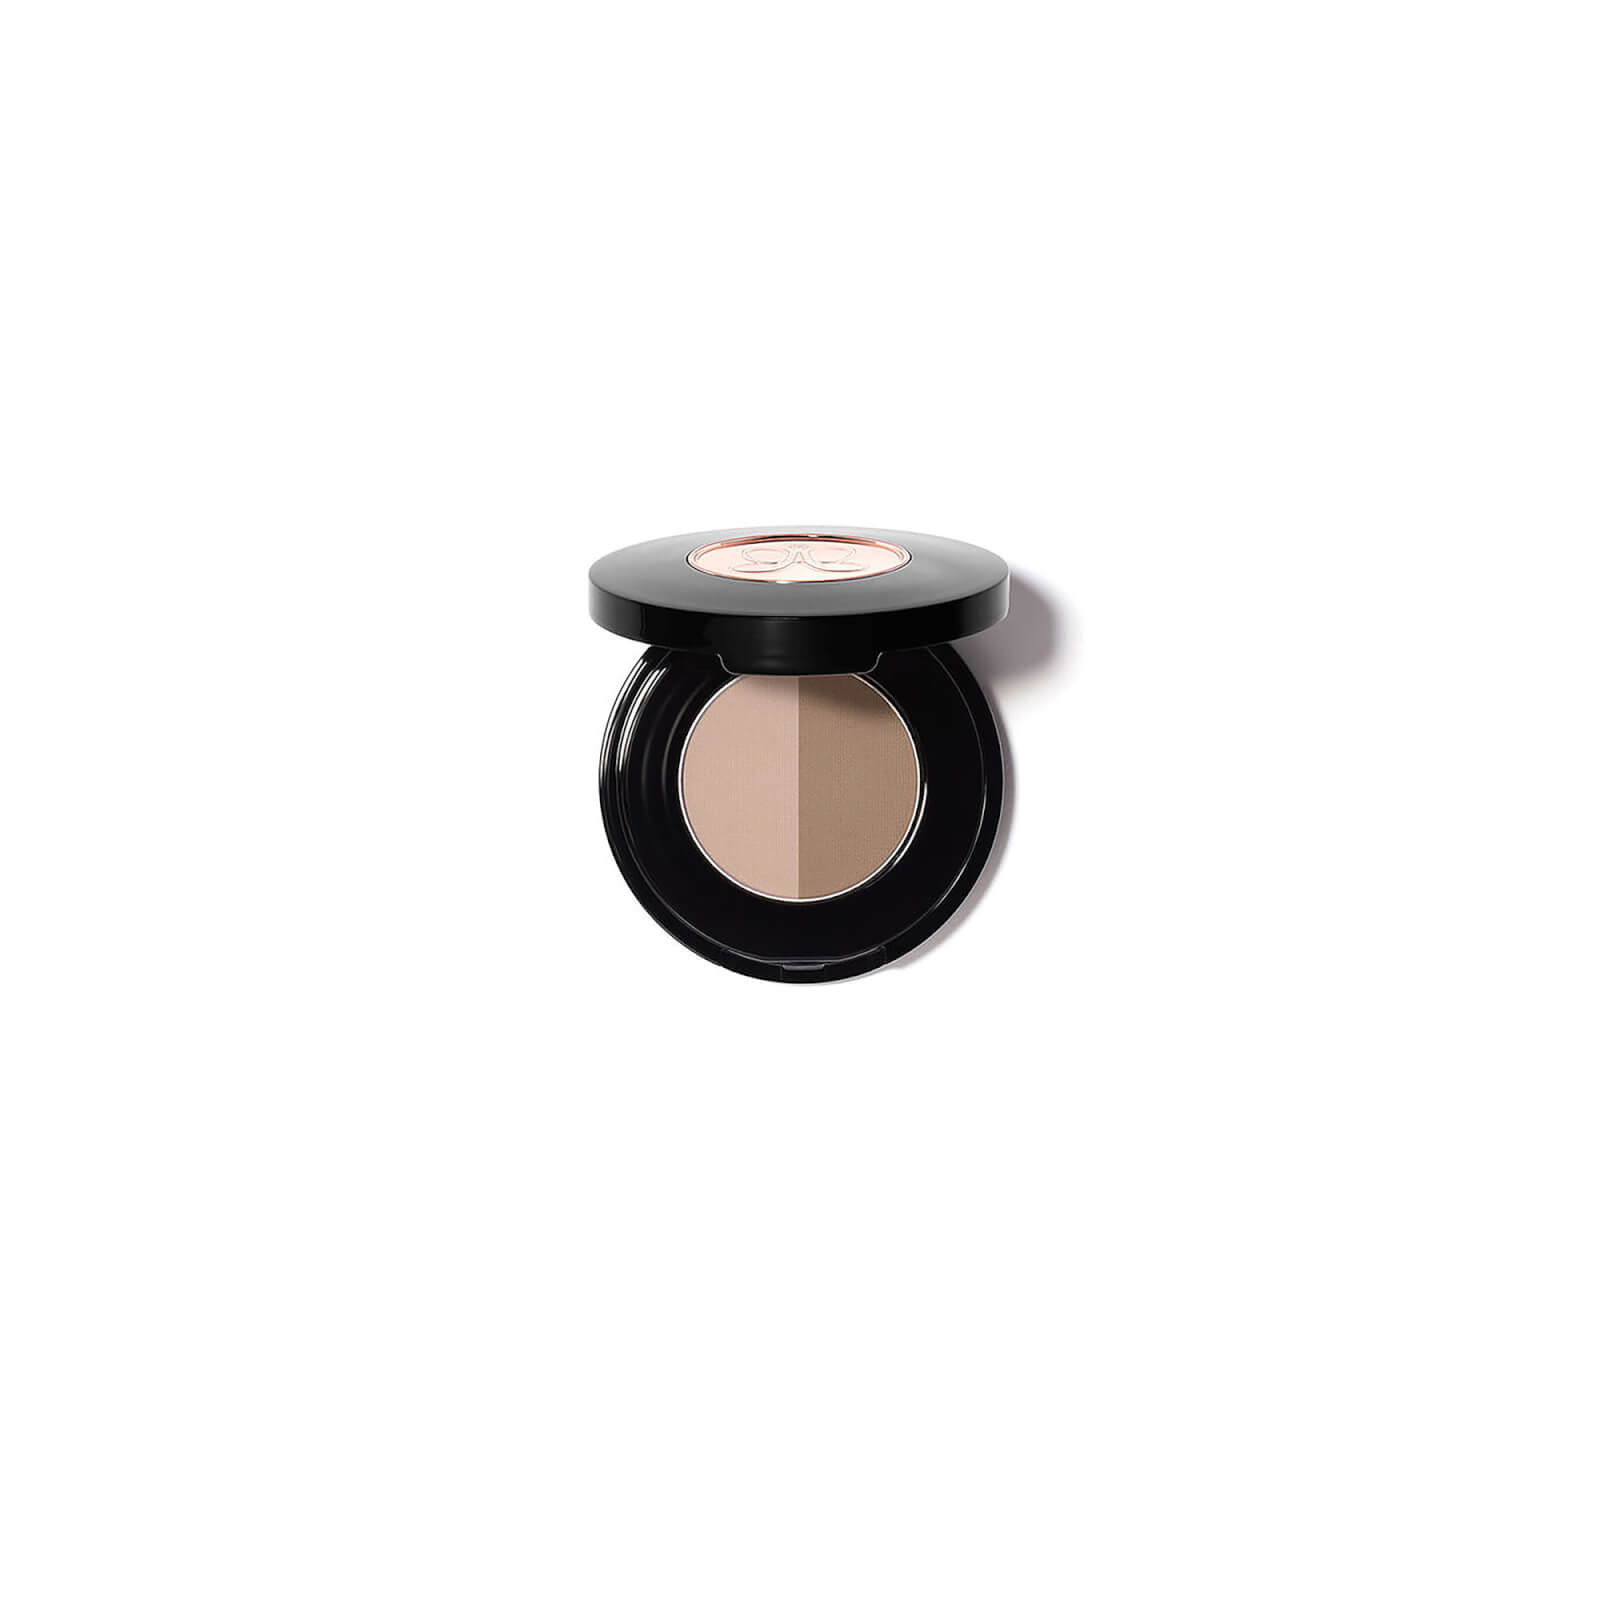 Anastasia Beverly Hills Brow Powder Duo 1.6g (Various Shades) - Taupe